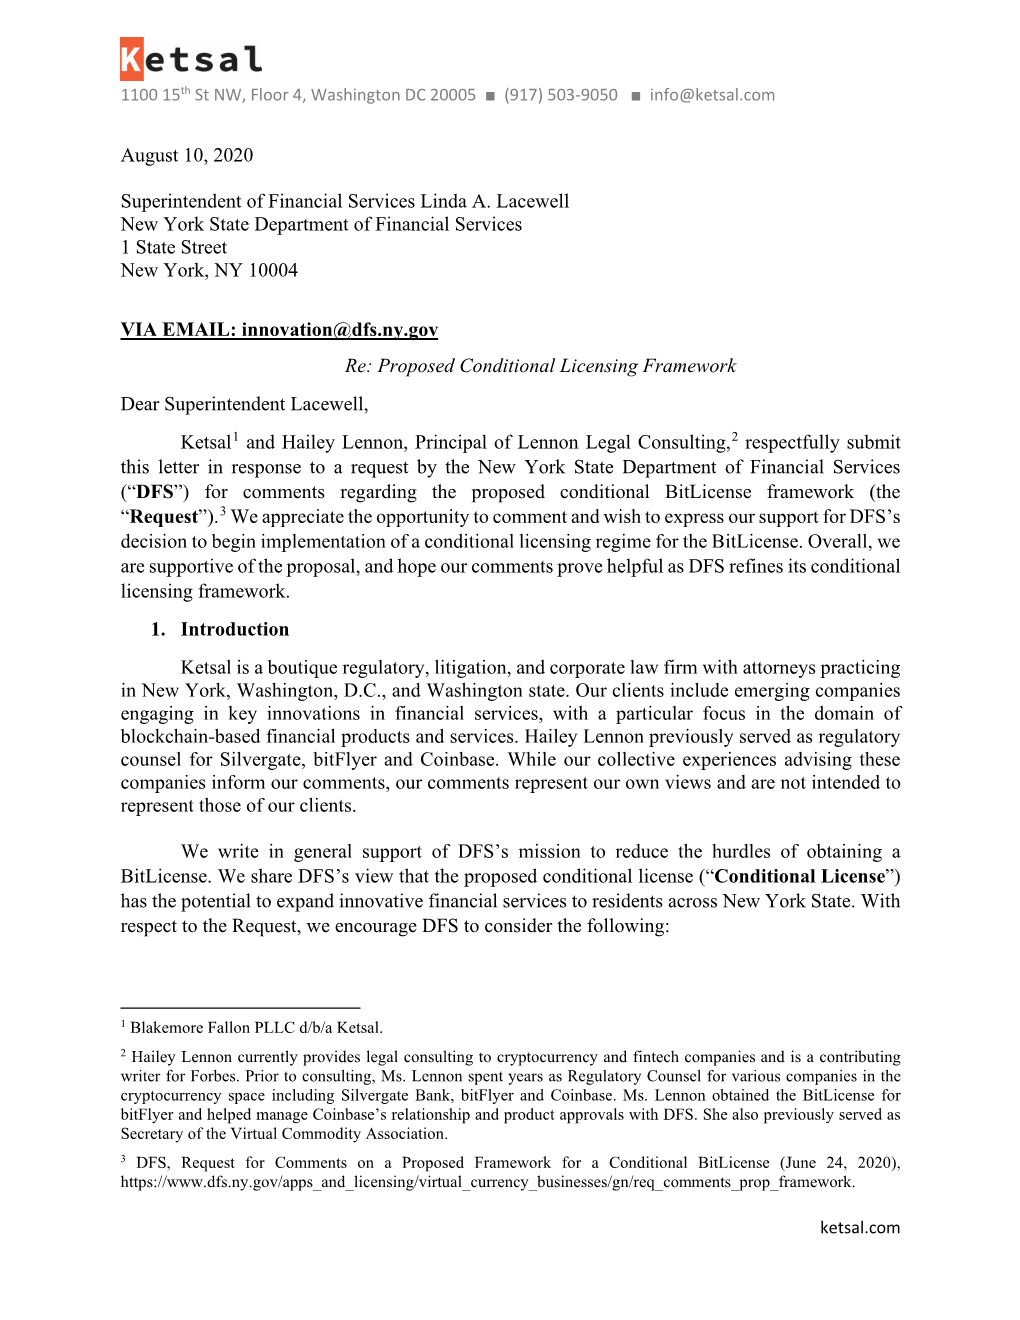 Ketsal and Hailey Lennon – NYDFS Comment Letter